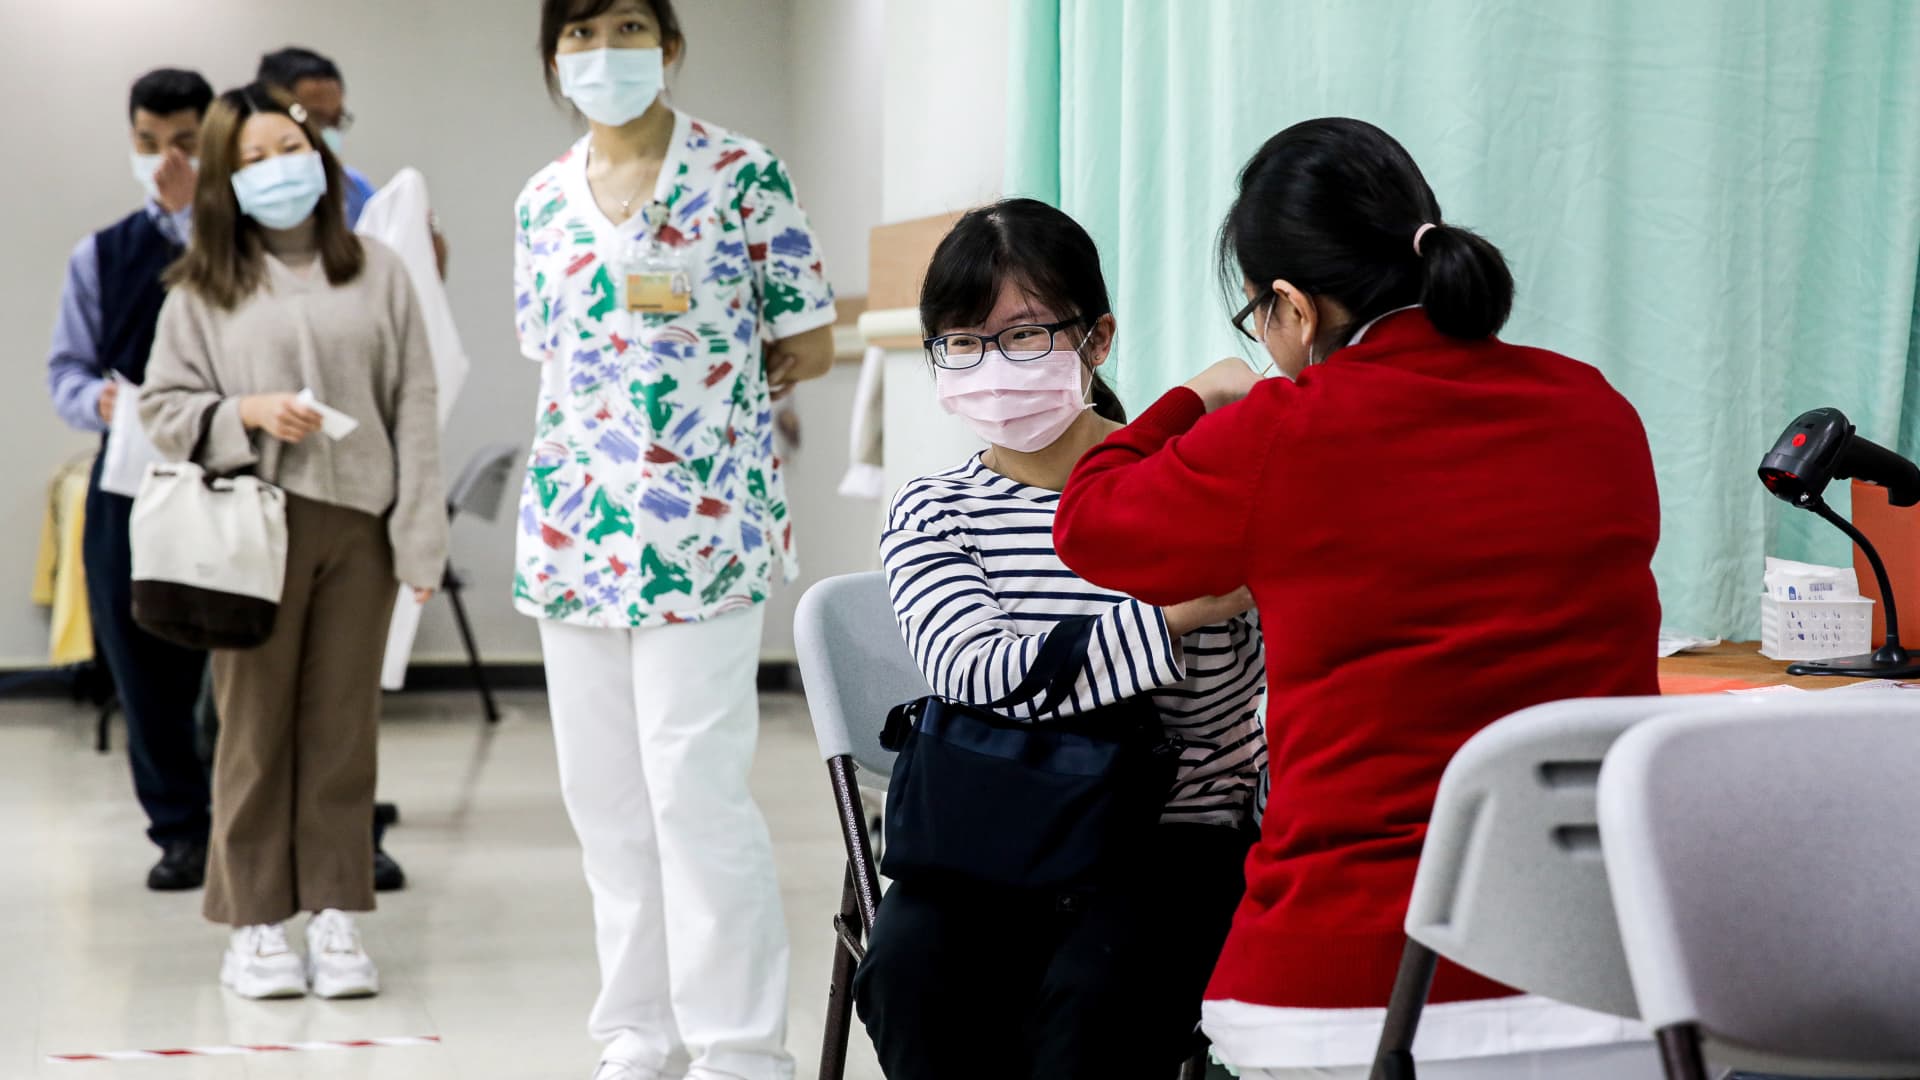 A healthcare worker receives the Oxford-AstraZeneca Covid-19 vaccine at Chang Gung Memorial Hospital in Taipei, Taiwan, on Monday, March 22, 2021. Taiwan started coronavirus vaccination today.